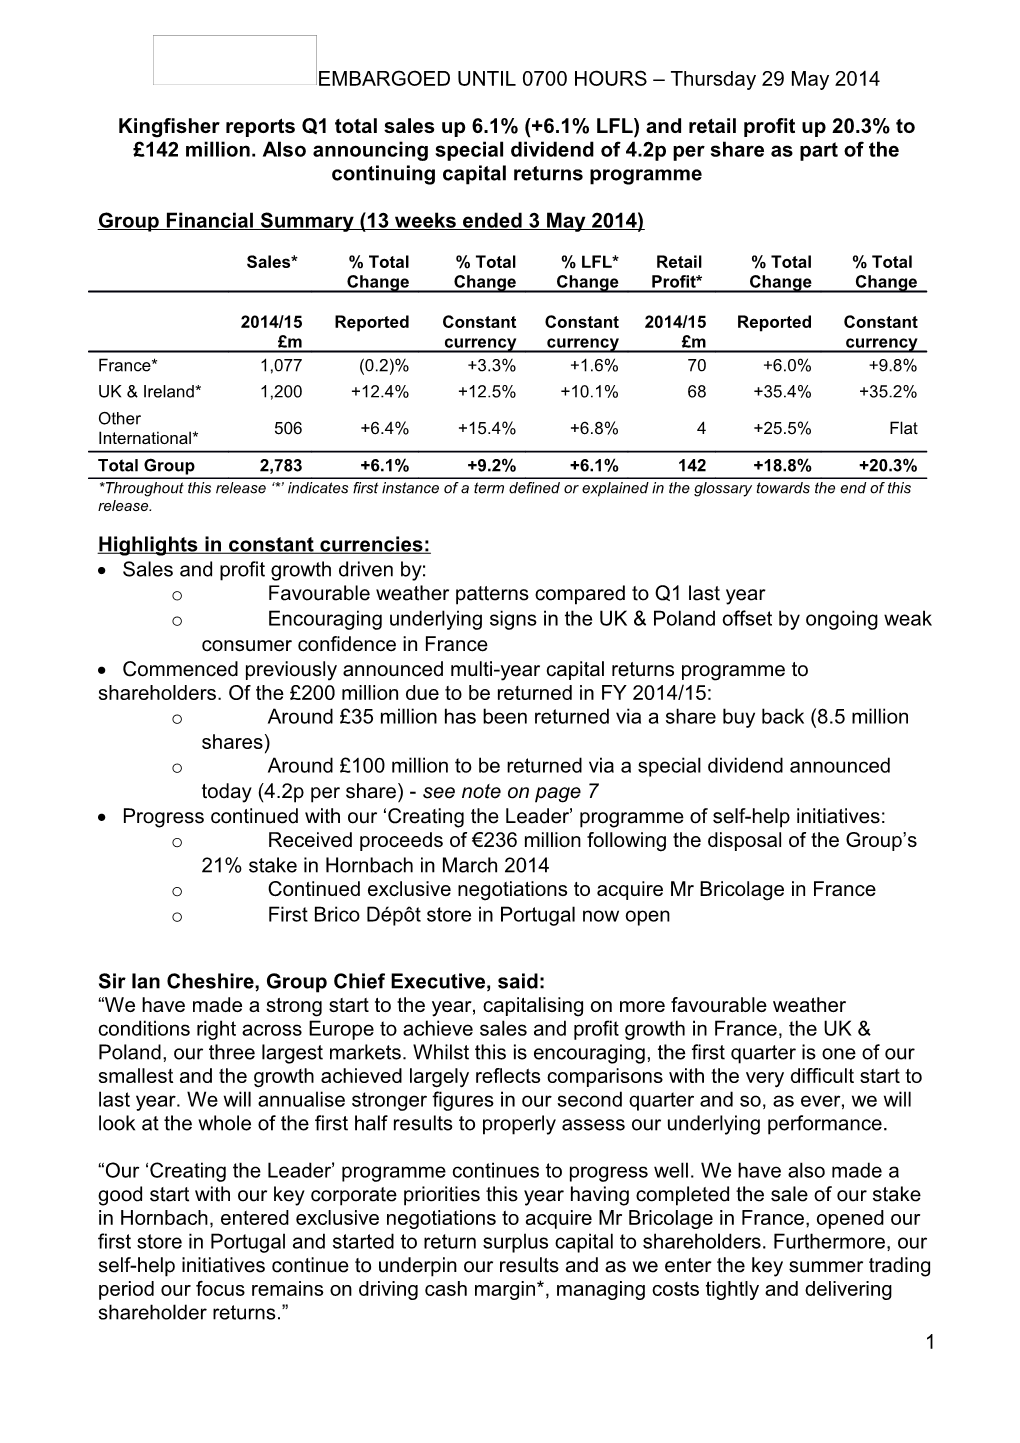 Group Financial Summary (13 Weeks Ended 3May 2014)